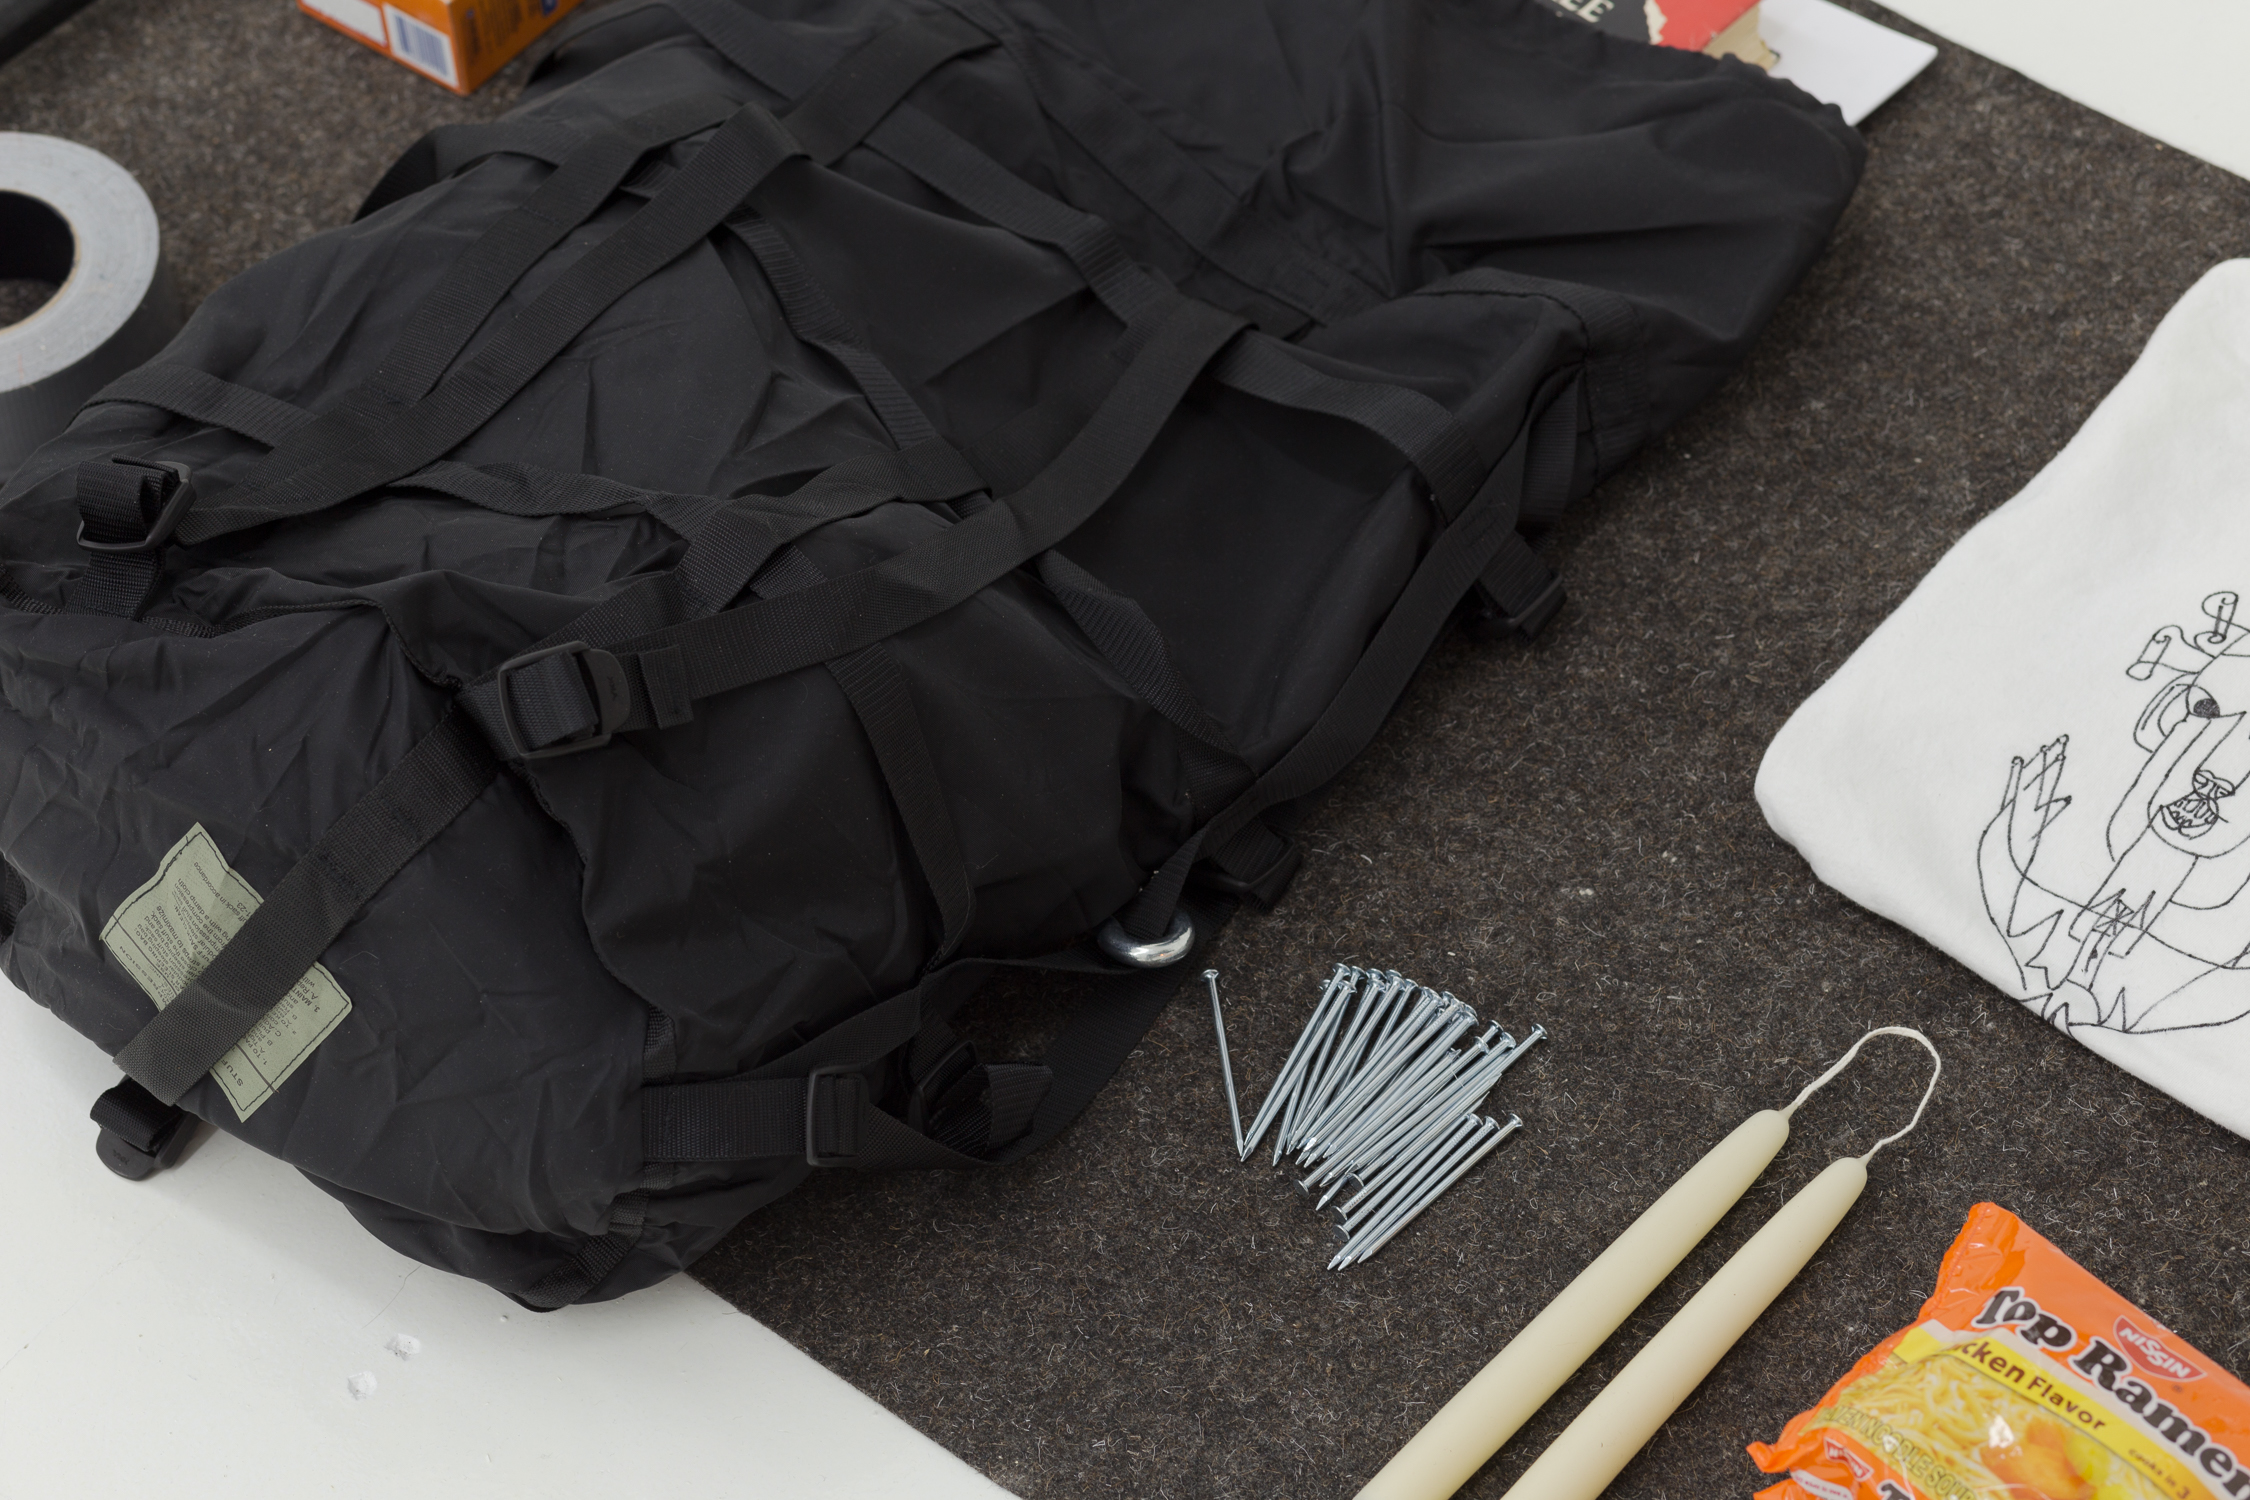 Items on gray felt: black backpack, a pile of nails, a folded t-shirt, two candles, and a package of Top Ramen